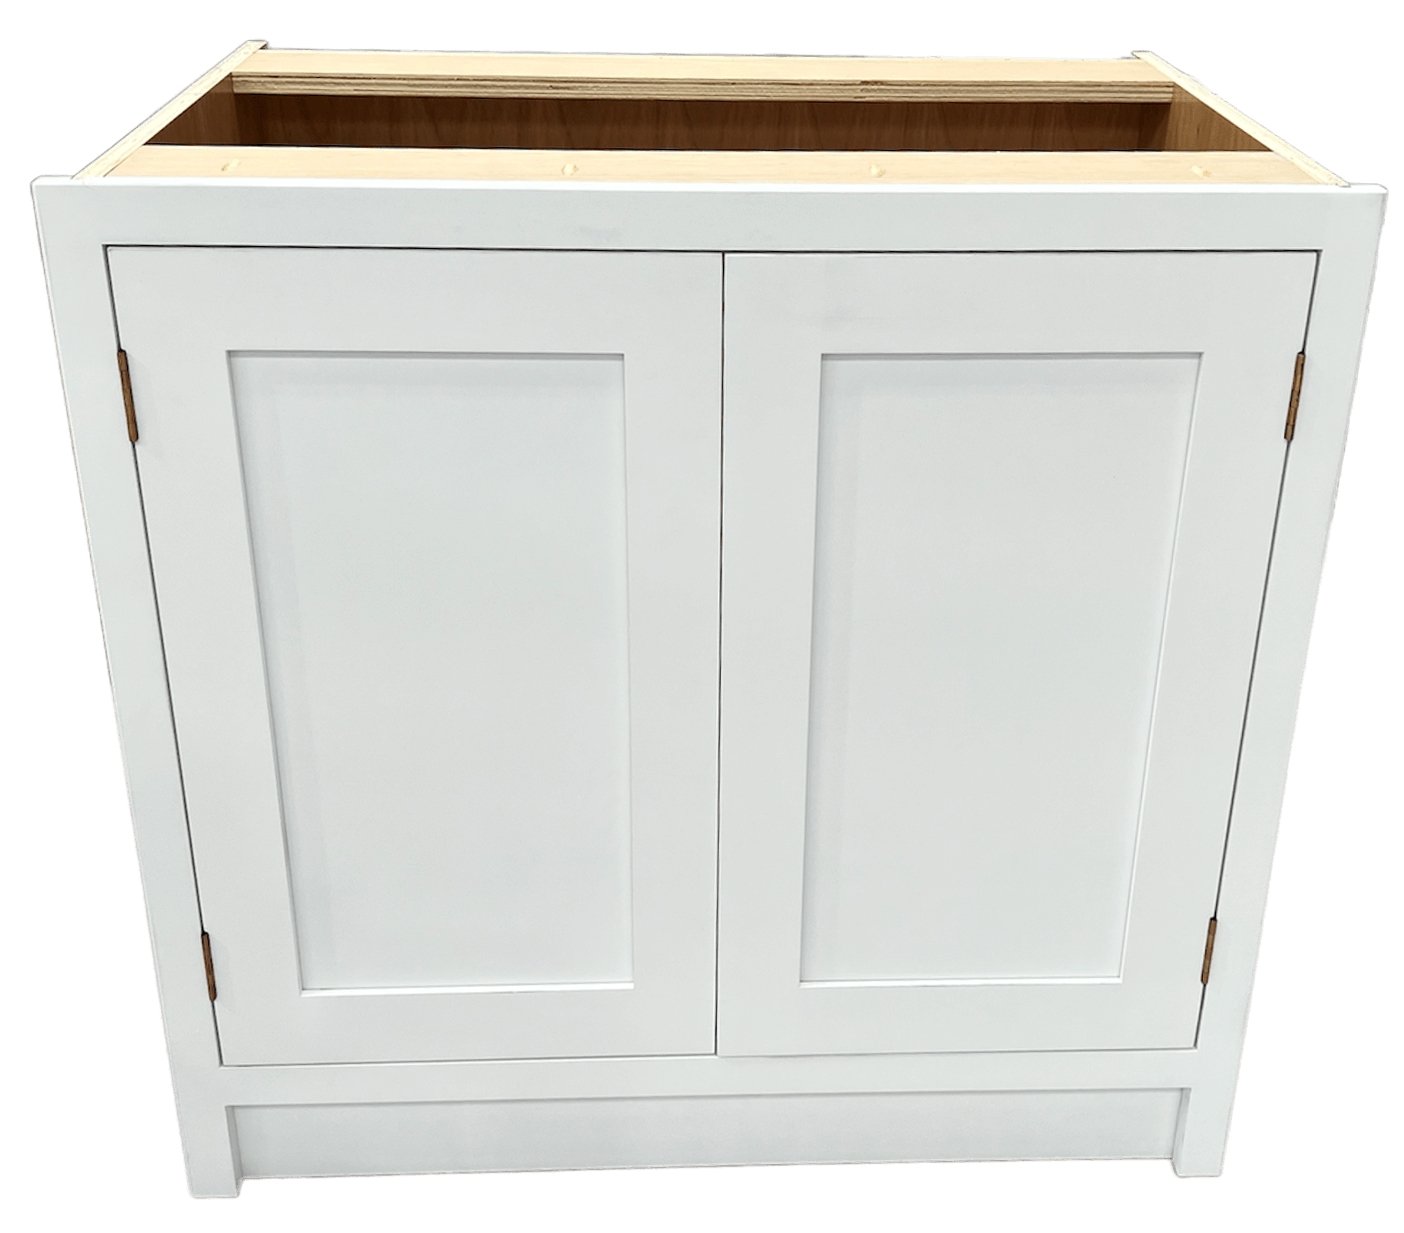 BH2 1000 - 1000mm Highline Double Door Base Unit - Classic Kitchens Direct